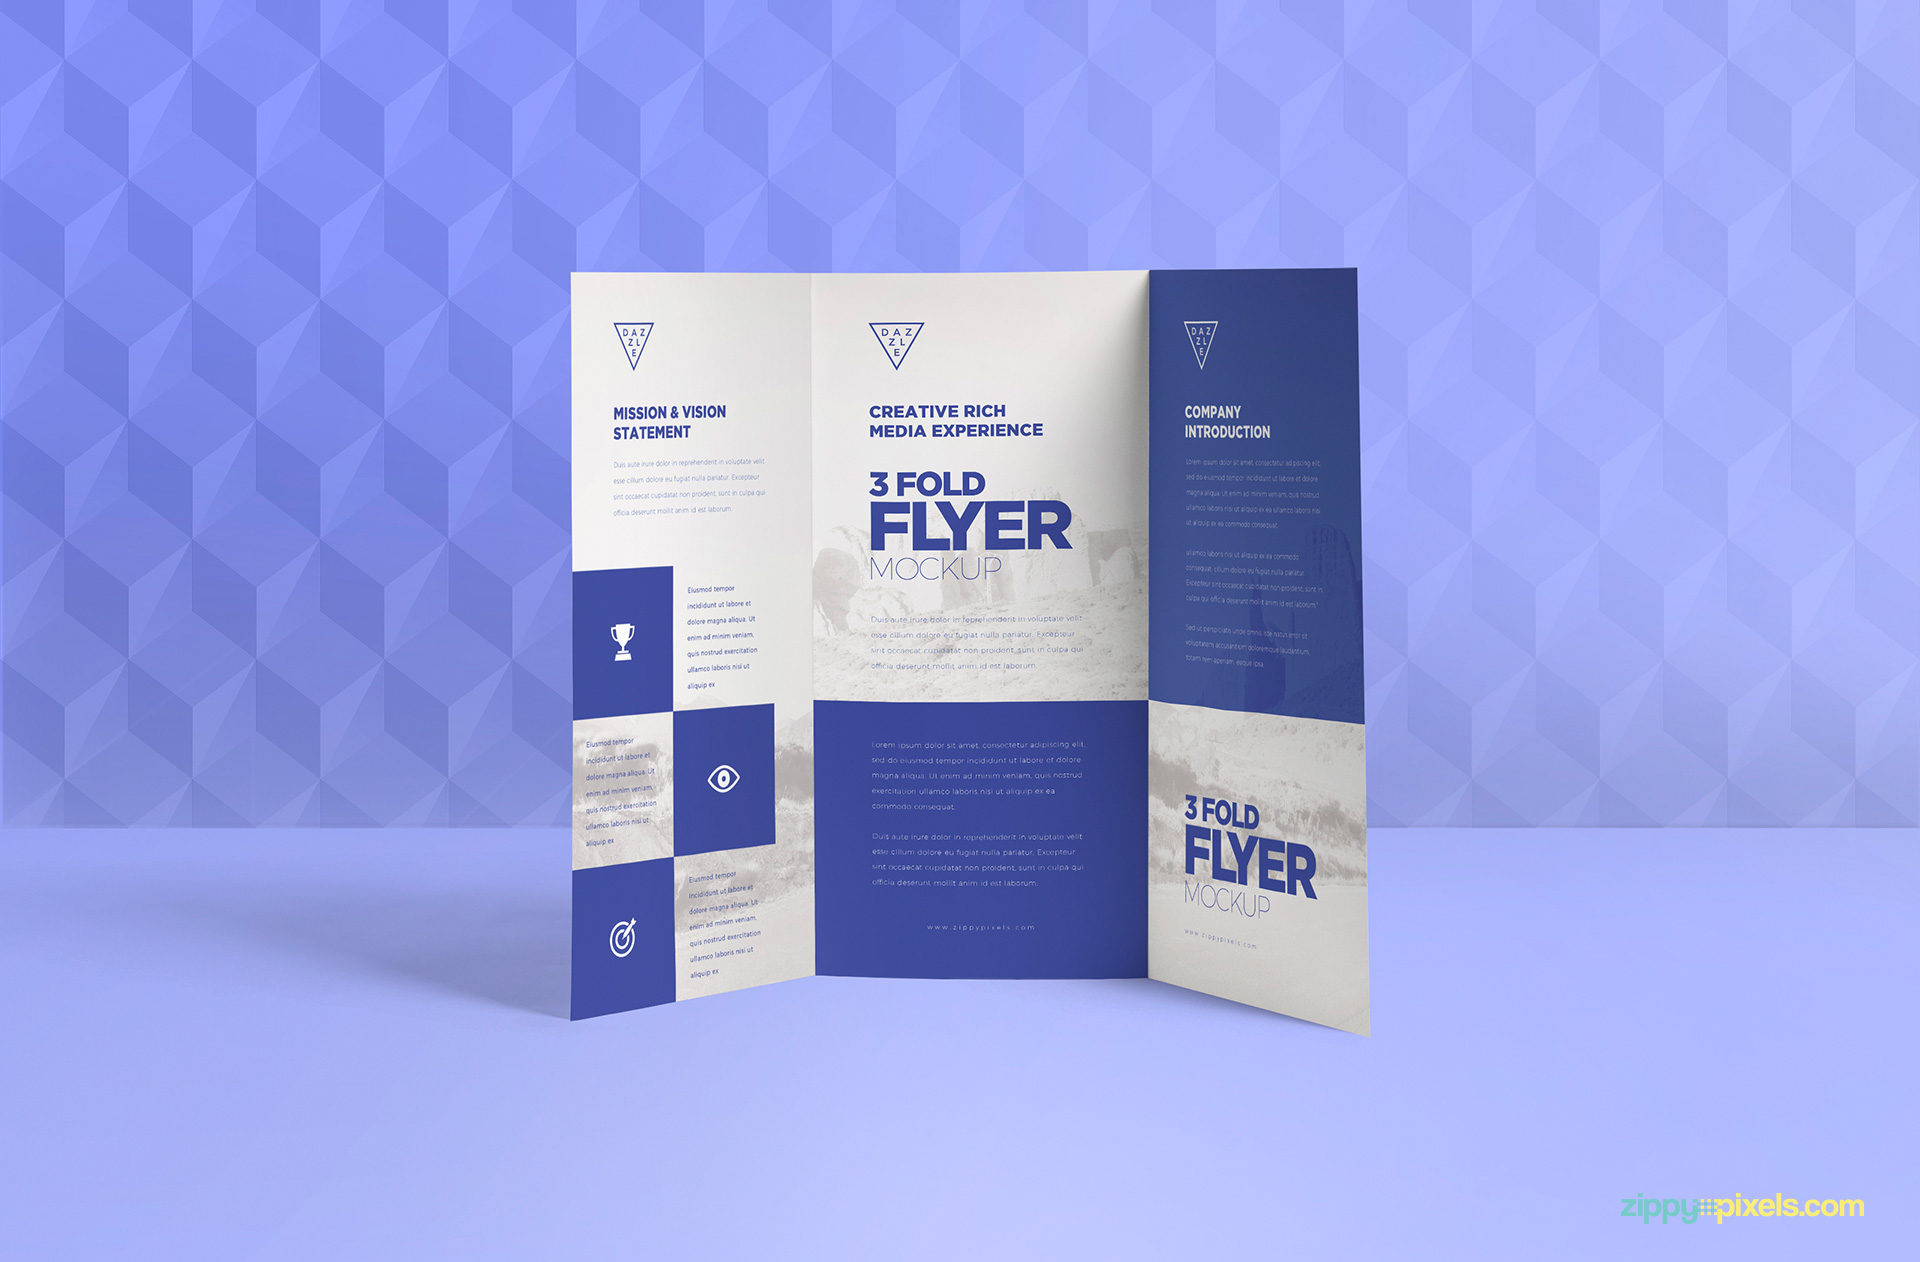 Inner designs of this 3 fold brochure mockup can be replaced with your designs.